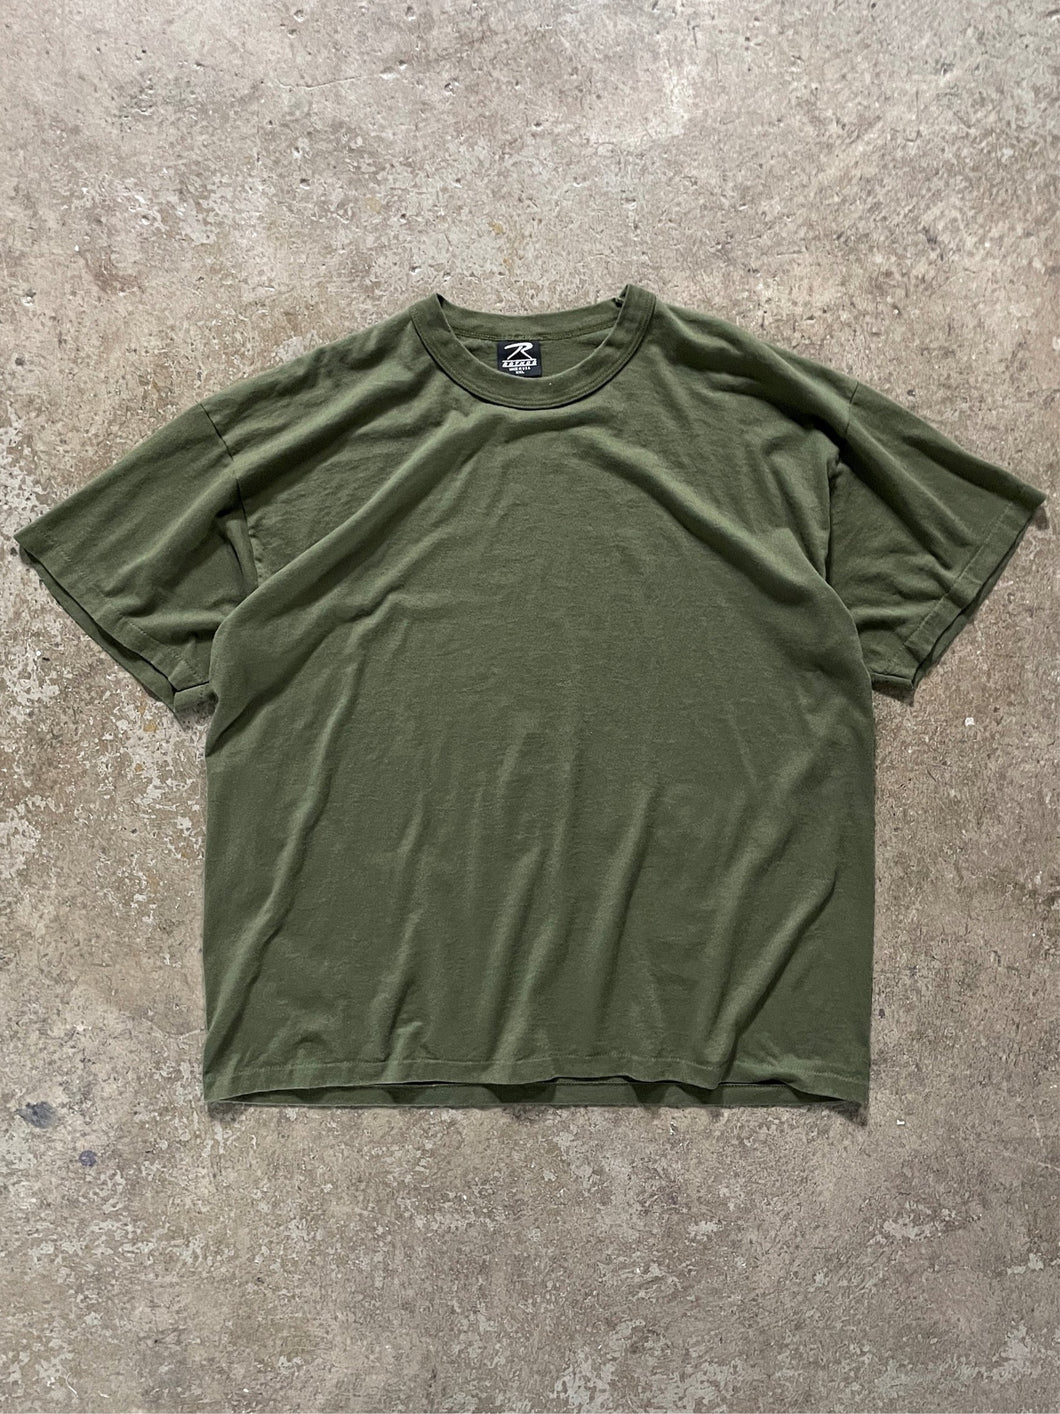 SINGLE STITCHED OLIVE GREEN MILITARY TEE - 1990S